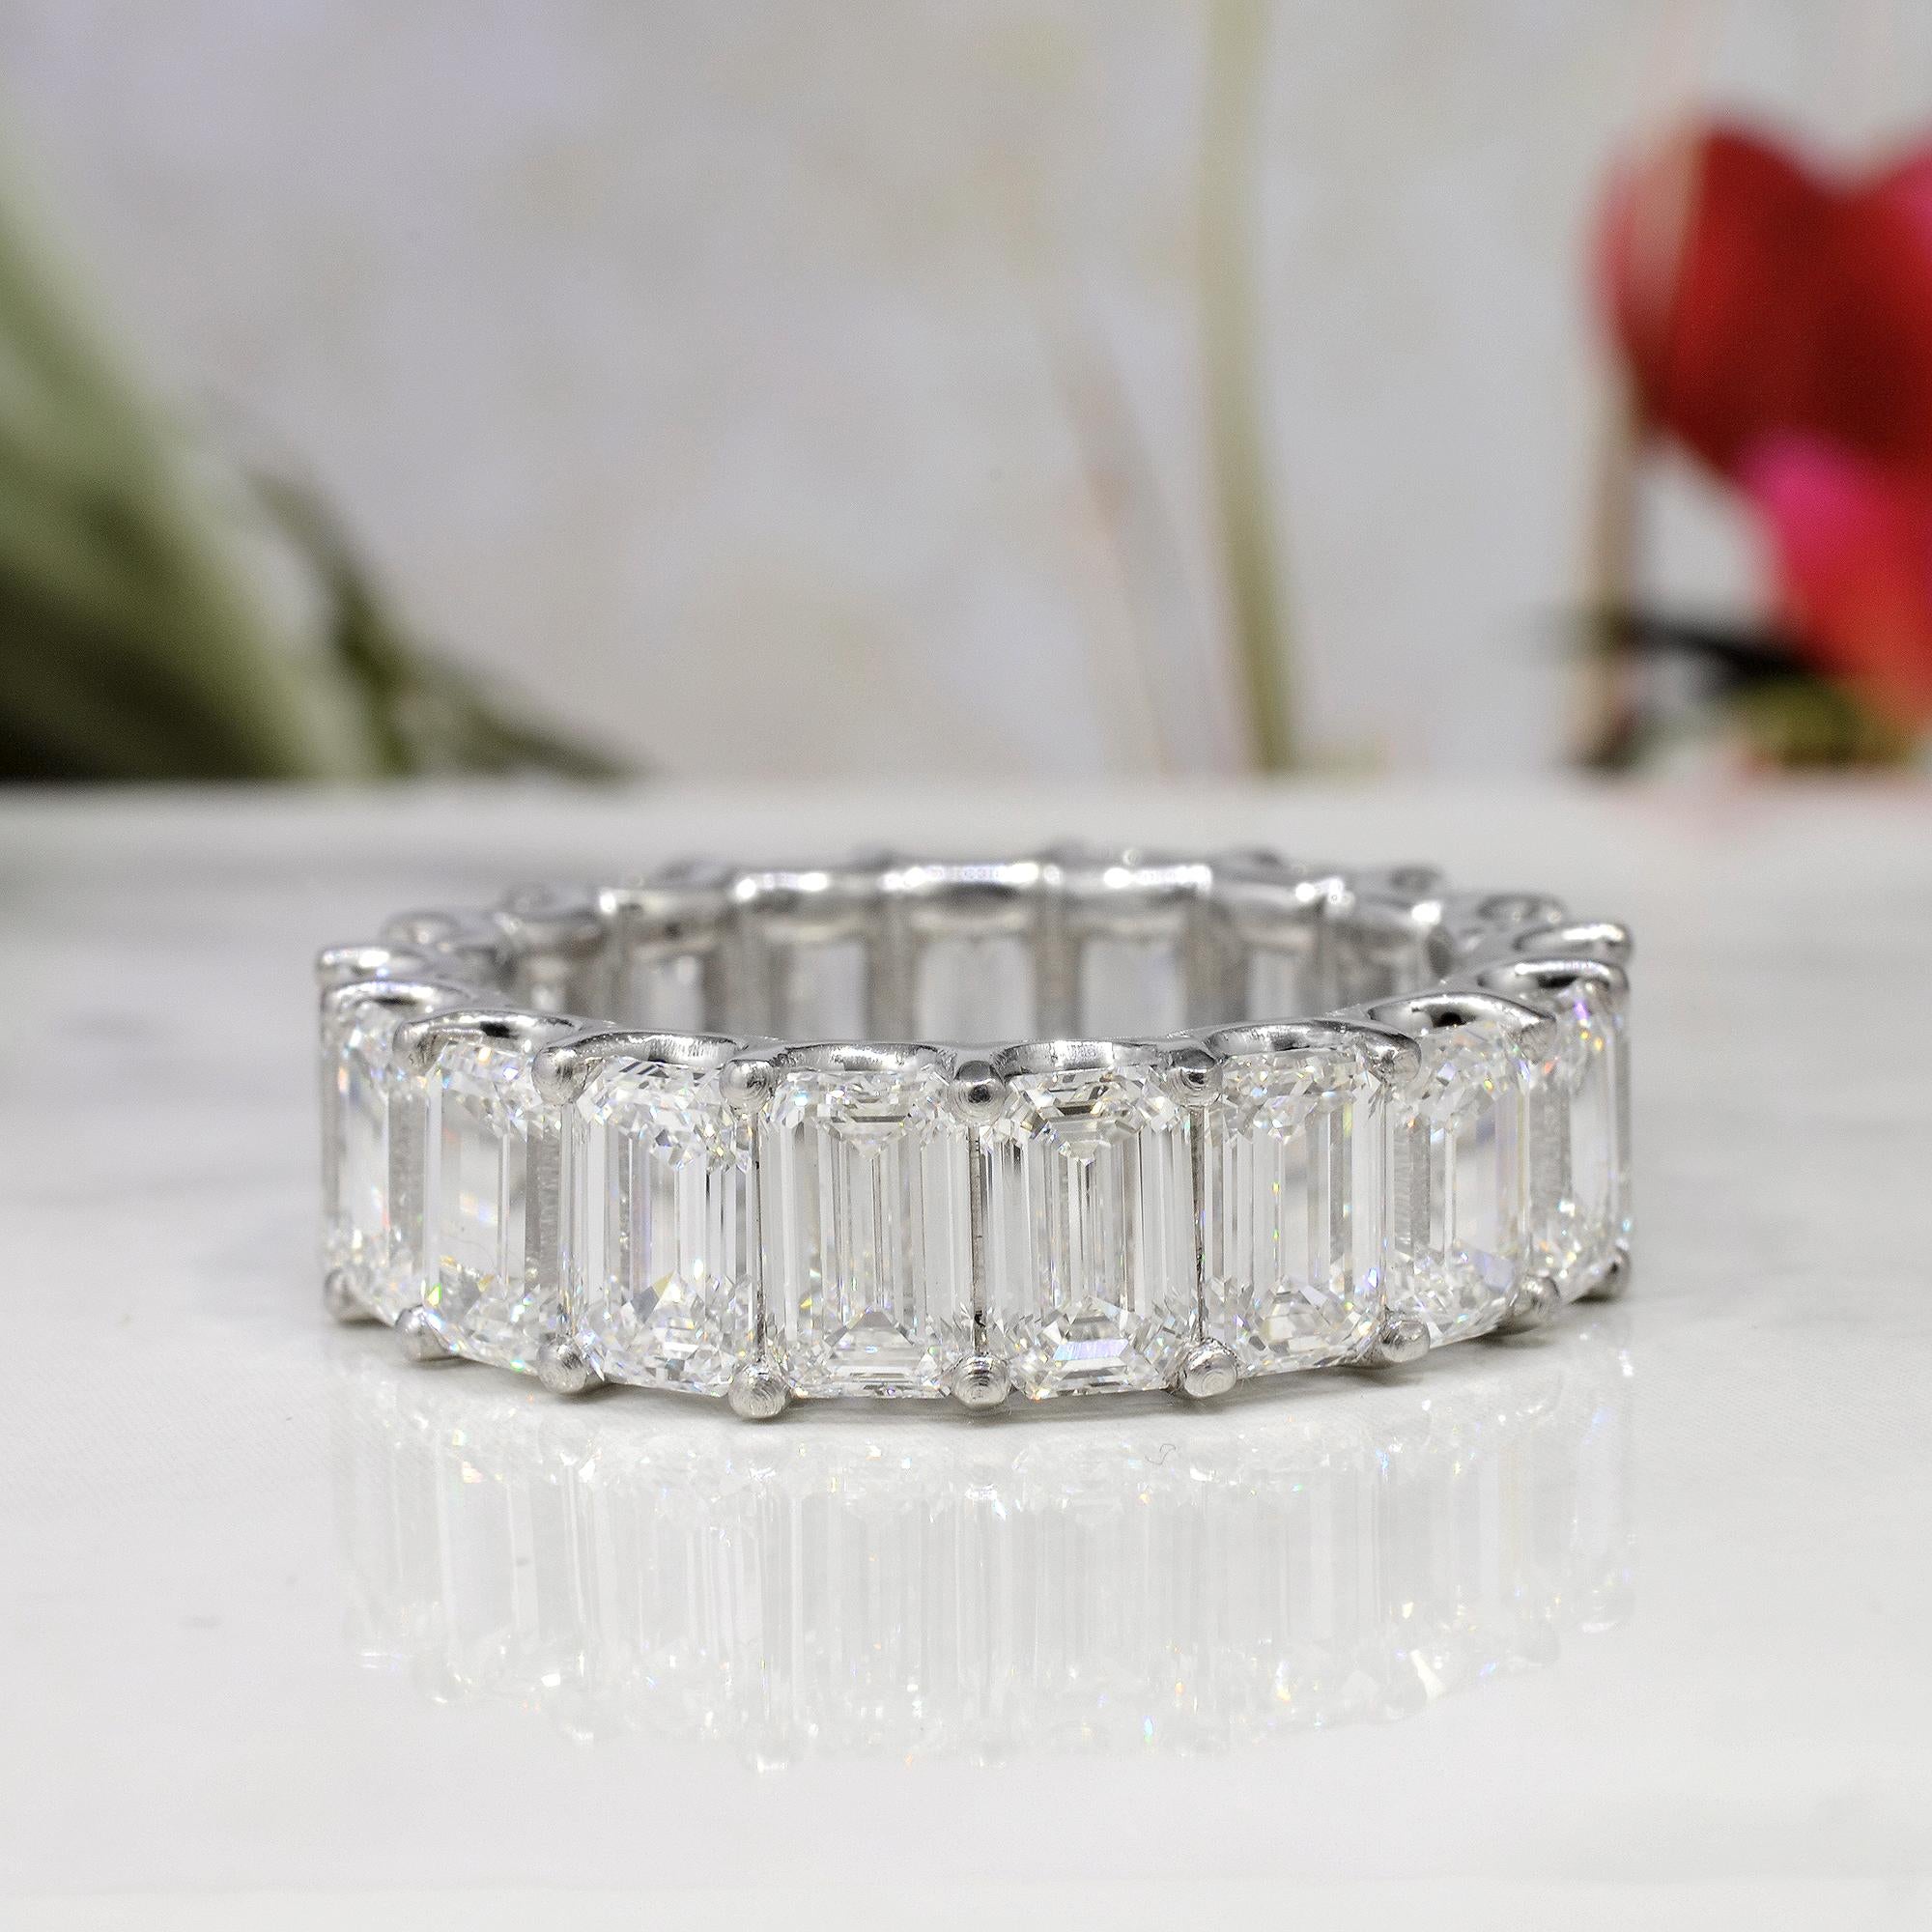 For Sale:  10.5 Carat Emerald Cut Eternity Ring H Color VS1 Clarity in 18k Gold 2